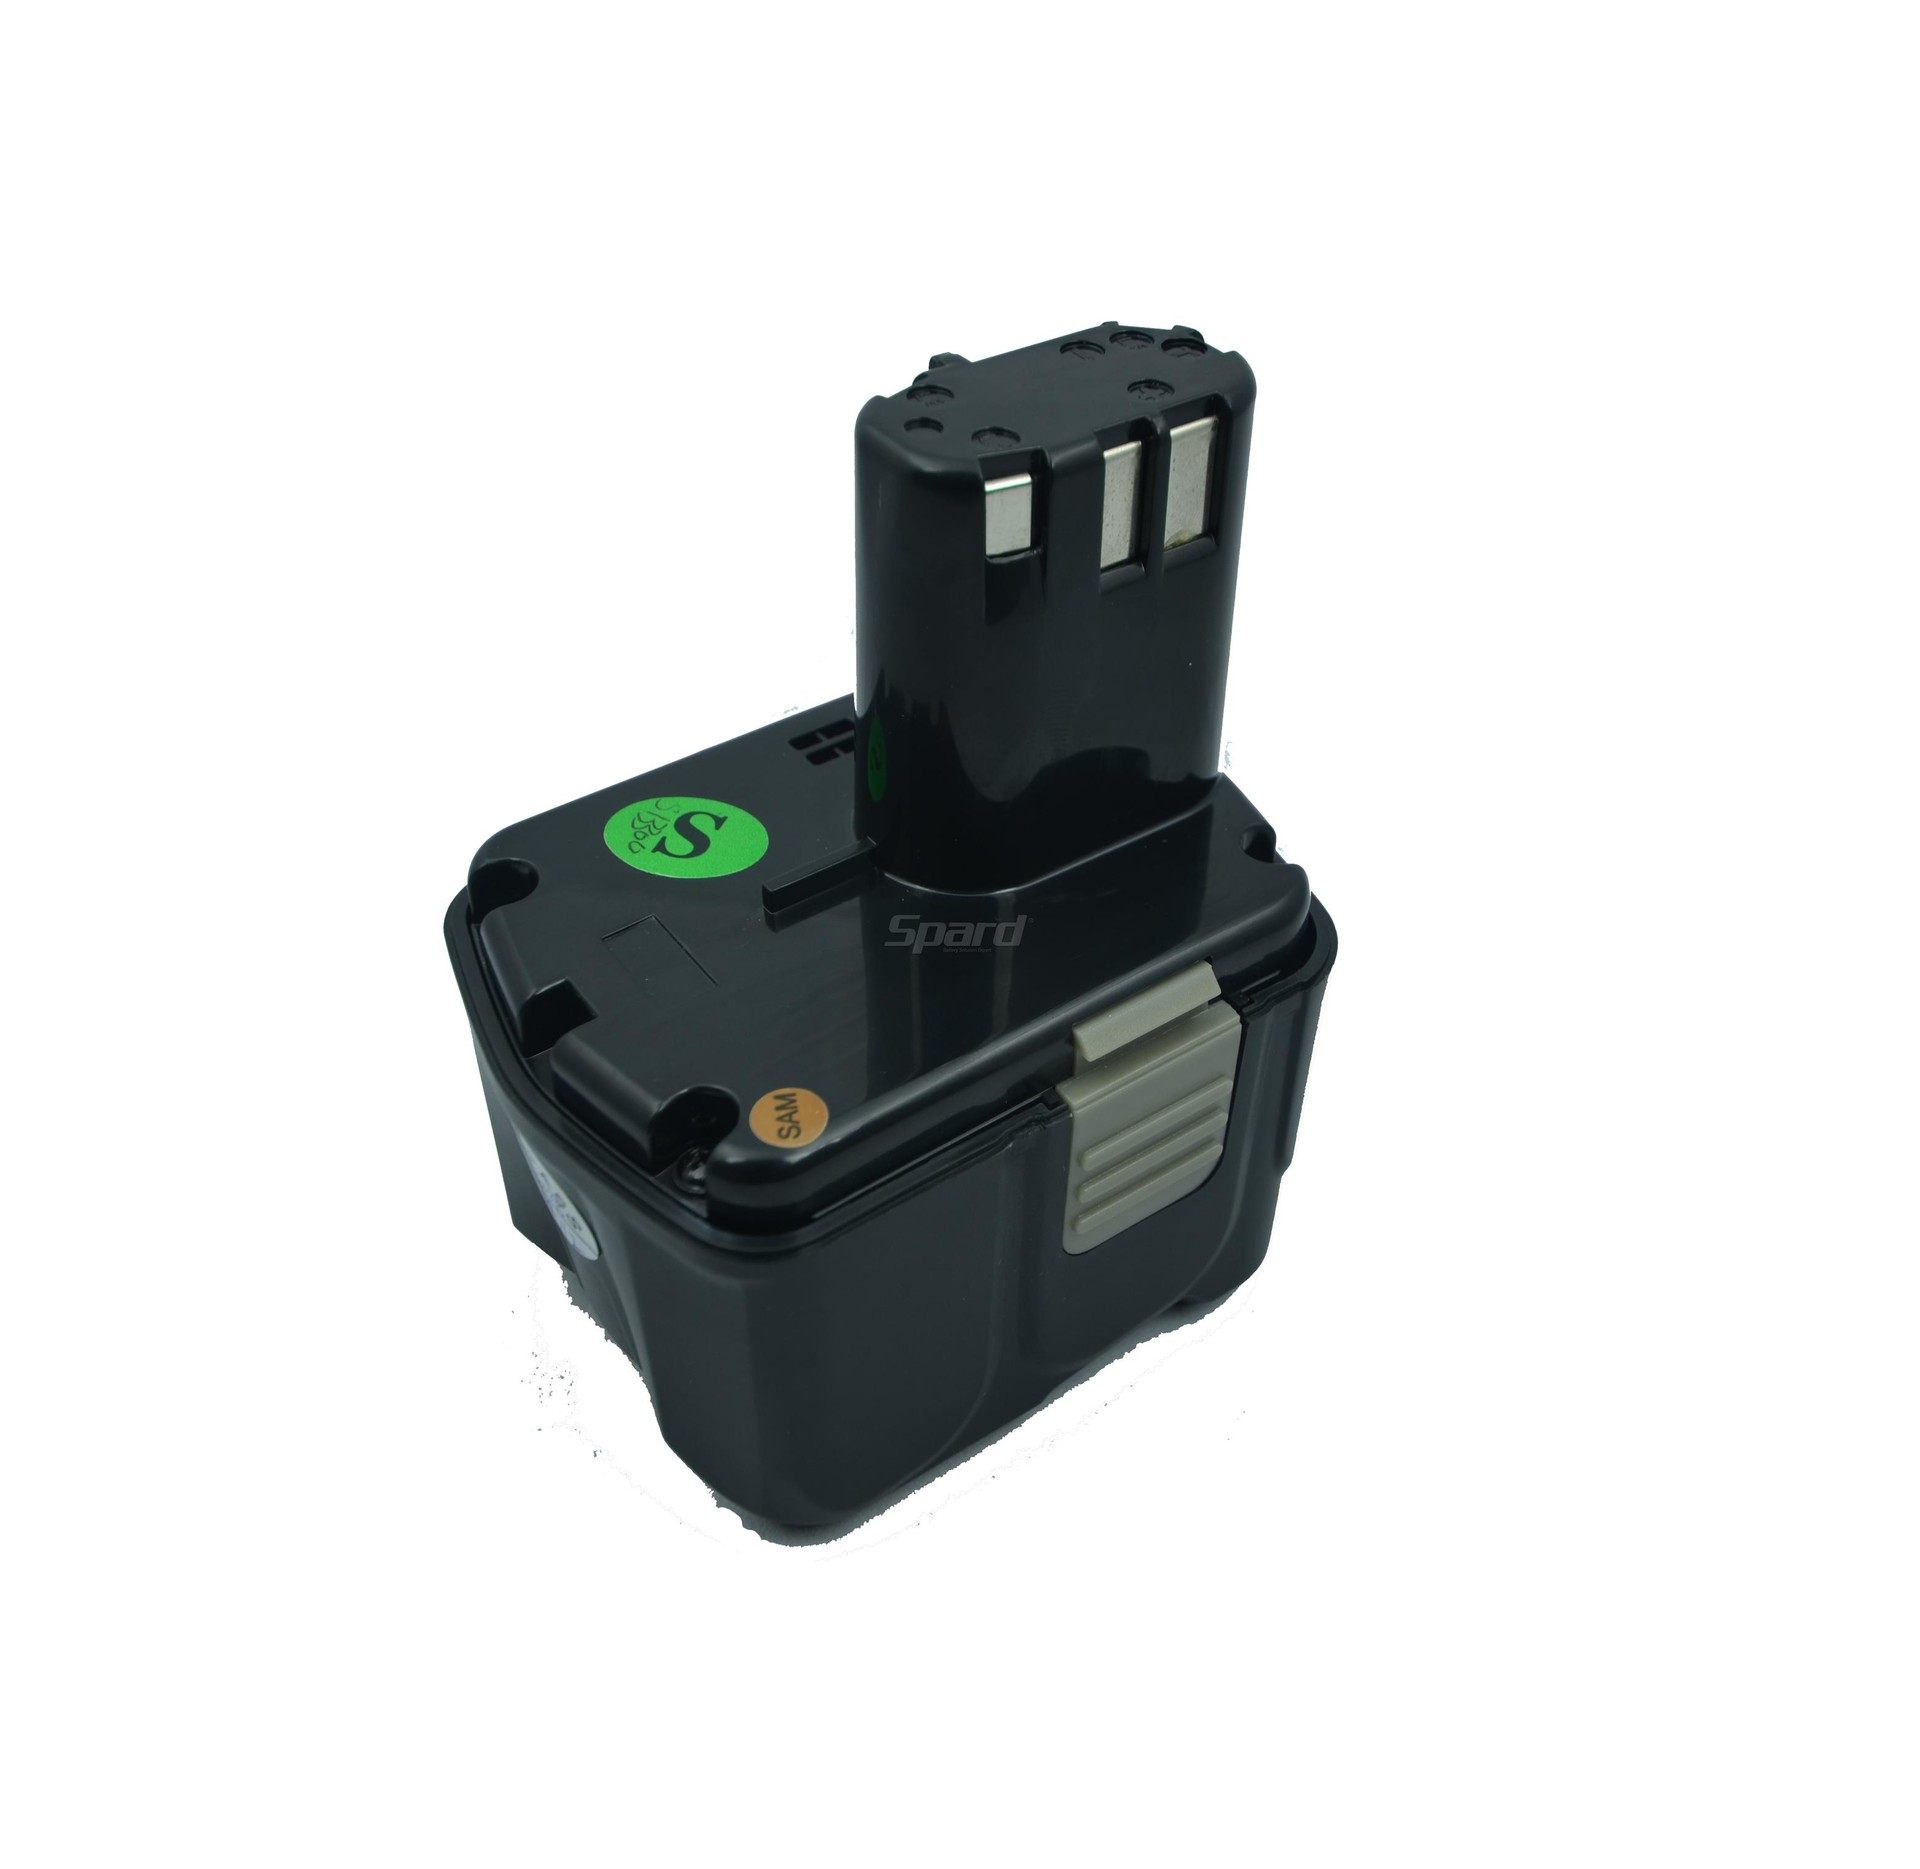 Spard power tool batteries with good price